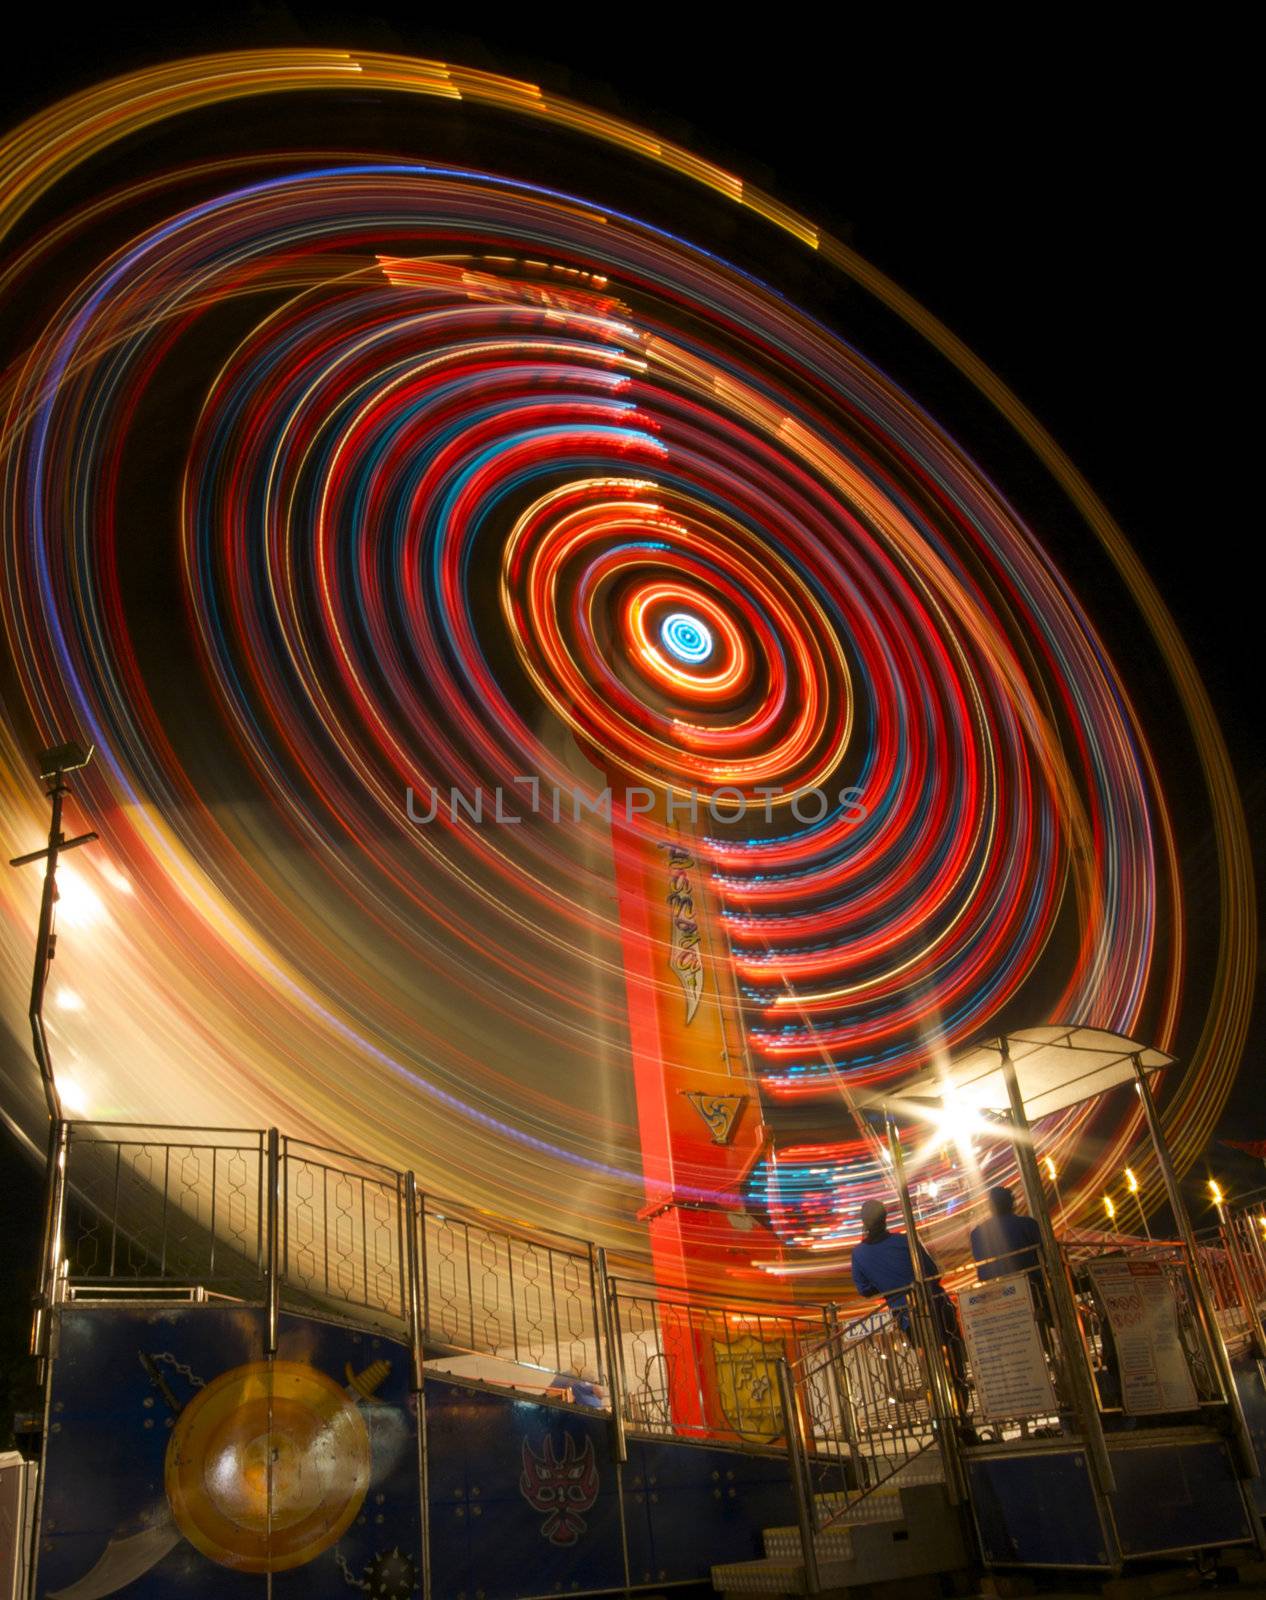 A long exposure photograph of a carnival ride shows a swirl of colorful lights